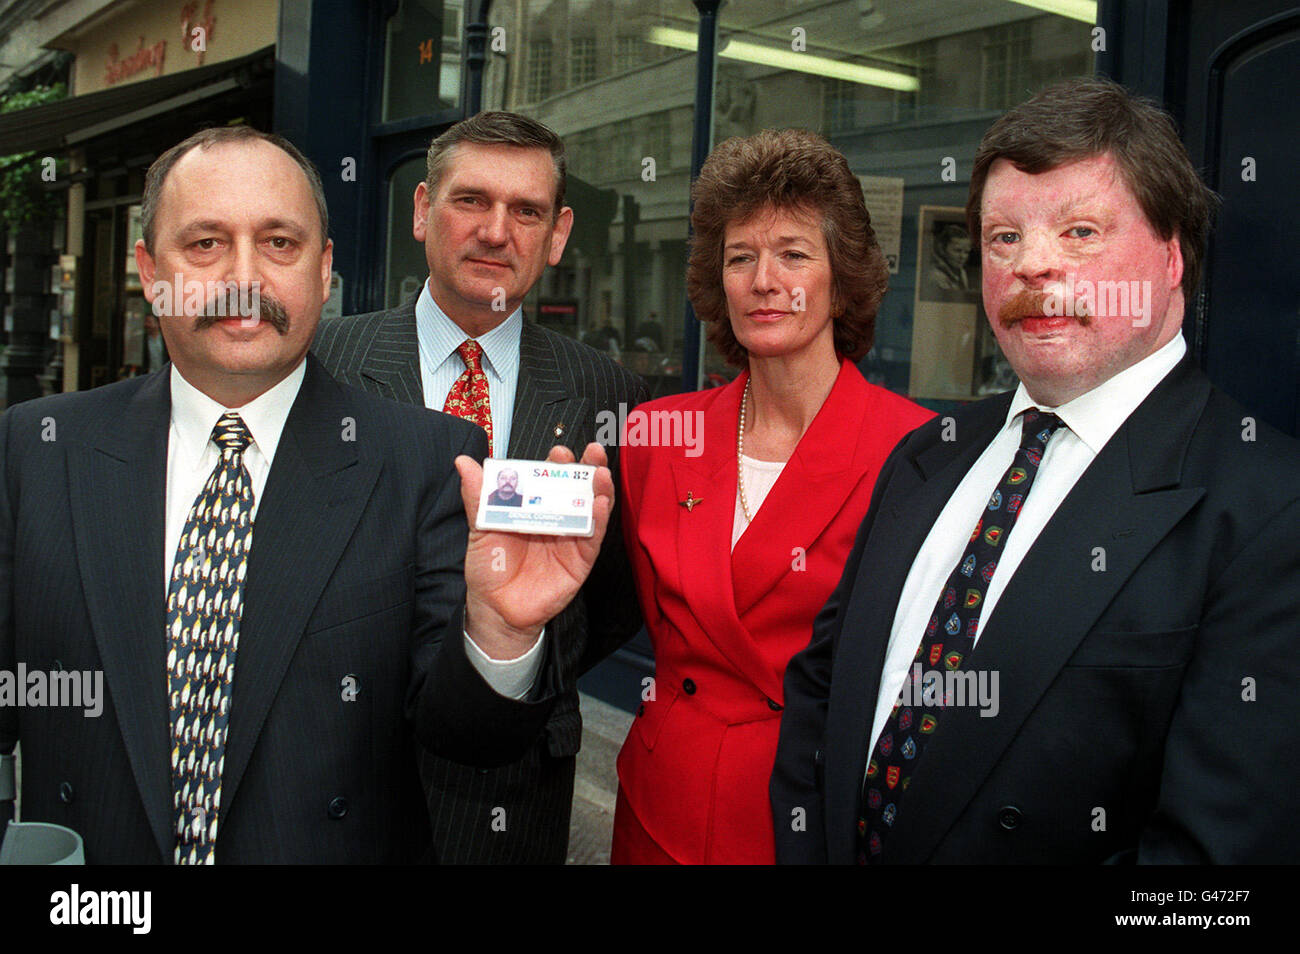 South Atlantic Medal Association (1982) which was launched at Falkland House in London today (Wednesday) by Falkland War Veterns (from left) Denzil Connick, of 3 Para, holding membership card, Tony Davies, former RSM with the Welsh Guards, Sarah Jones, widow of vetern Col. H Jones who was killed in action and Simon Weston, fomer Welsh Guard. The South Atlantic Medal was awarded by Her Majesty's Government to all those who took part in the fight for liberation of the Flakland Islands and South Georgia in 1982. Photo by Michael Stephens/PA. Stock Photo